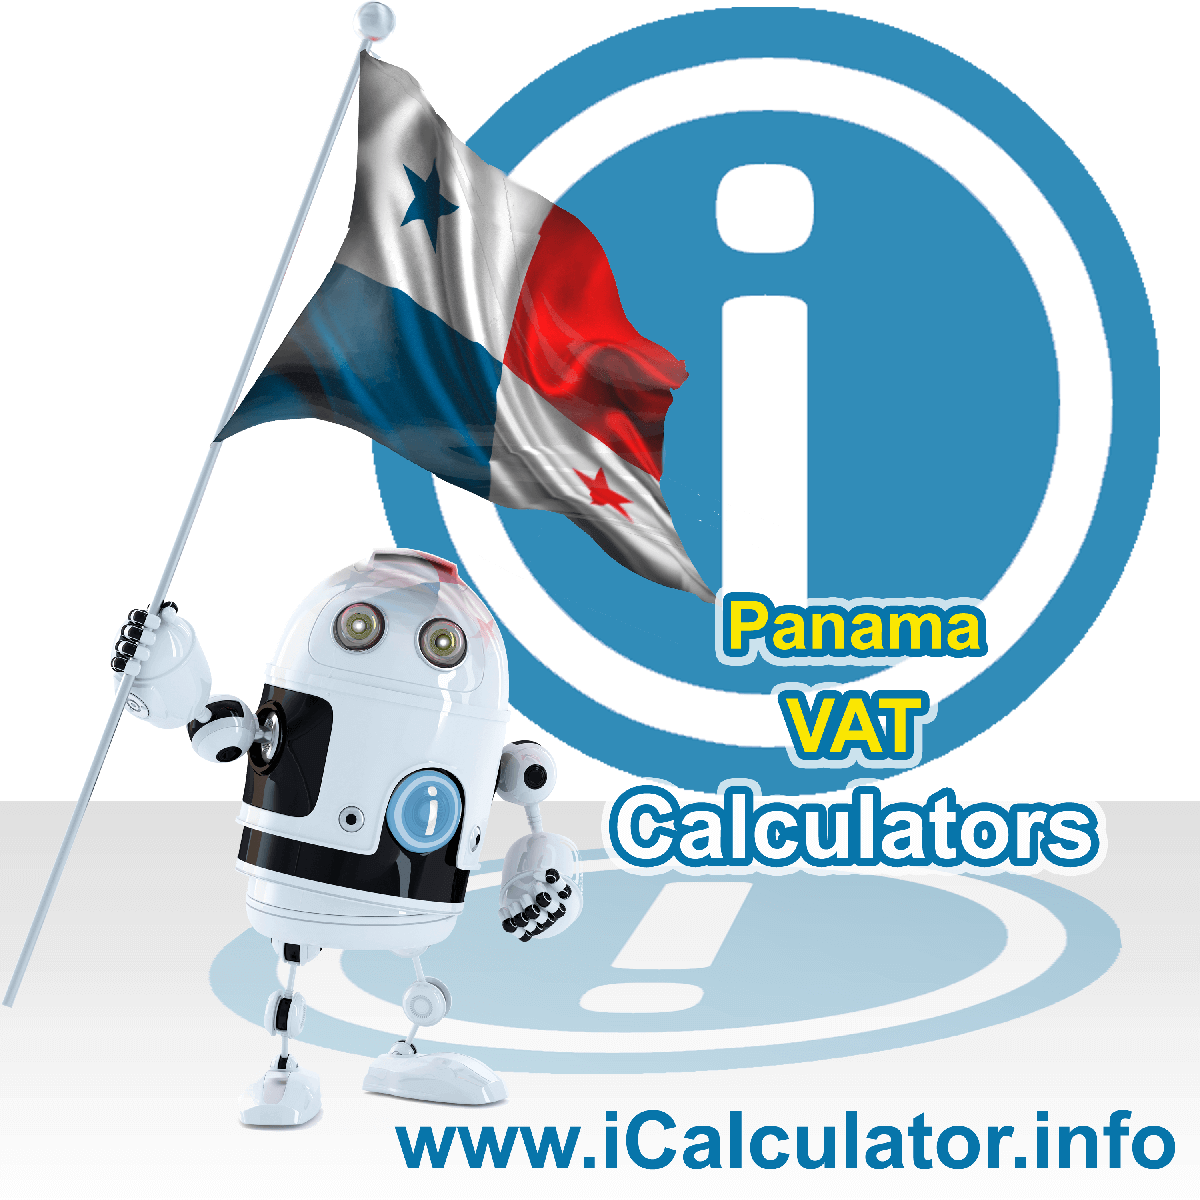 Panama VAT Calculator. This image shows the Panama flag and information relating to the VAT formula used for calculating Value Added Tax in Panama using the Panama VAT Calculator in 2023